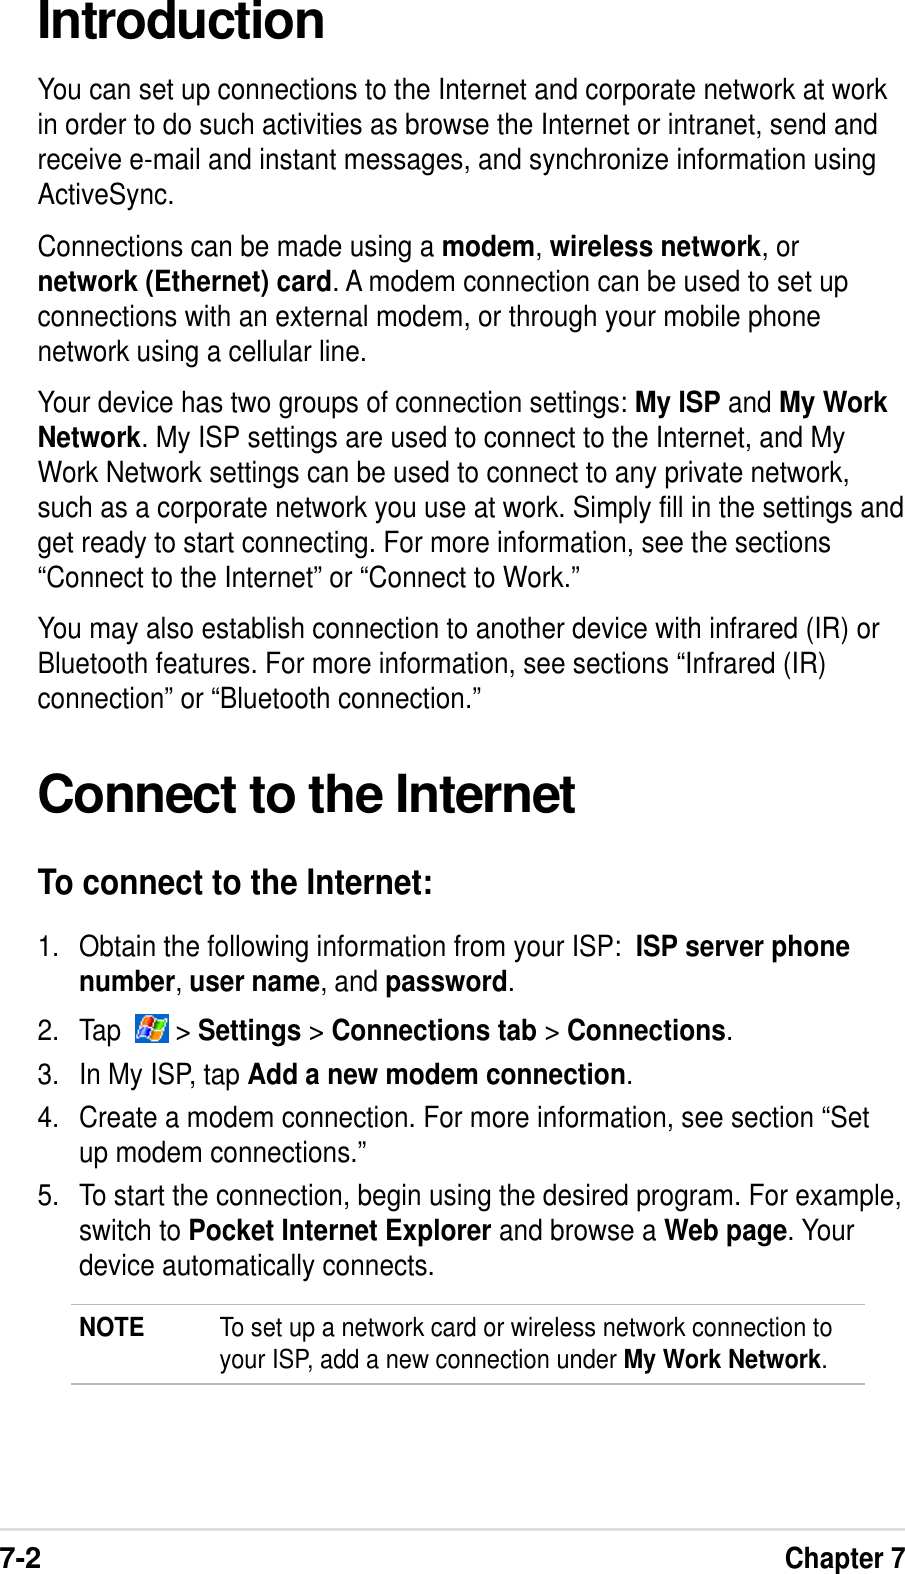 7-2Chapter 7IntroductionYou can set up connections to the Internet and corporate network at workin order to do such activities as browse the Internet or intranet, send andreceive e-mail and instant messages, and synchronize information usingActiveSync.Connections can be made using a modem,wireless network, ornetwork (Ethernet) card. A modem connection can be used to set upconnections with an external modem, or through your mobile phonenetwork using a cellular line.Your device has two groups of connection settings: My ISP and My WorkNetwork. My ISP settings are used to connect to the Internet, and MyWork Network settings can be used to connect to any private network,such as a corporate network you use at work. Simply fill in the settings andget ready to start connecting. For more information, see the sections“Connect to the Internet” or “Connect to Work.”You may also establish connection to another device with infrared (IR) orBluetooth features. For more information, see sections “Infrared (IR)connection” or “Bluetooth connection.”Connect to the InternetTo connect to the Internet:1. Obtain the following information from your ISP:  ISP server phonenumber,user name, and password.2. Tap    &gt; Settings &gt;Connections tab &gt;Connections.3. In My ISP, tap Add a new modem connection.4. Create a modem connection. For more information, see section “Setup modem connections.”5. To start the connection, begin using the desired program. For example,switch to Pocket Internet Explorer and browse a Web page. Yourdevice automatically connects.NOTE To set up a network card or wireless network connection toyour ISP, add a new connection under My Work Network.